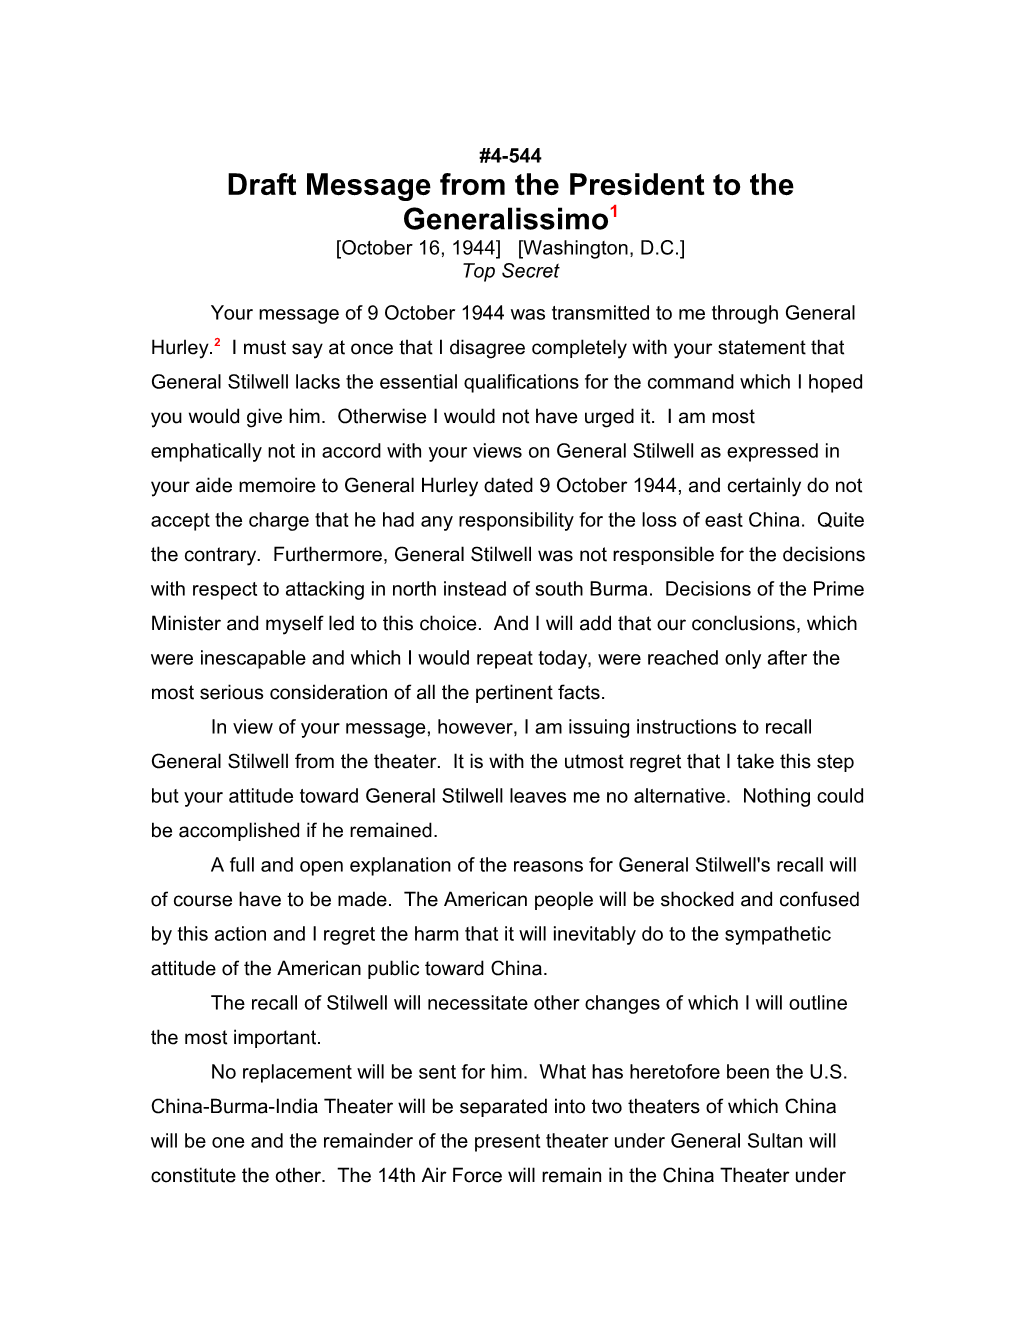 Draft Message from the President to the Generalissimo1